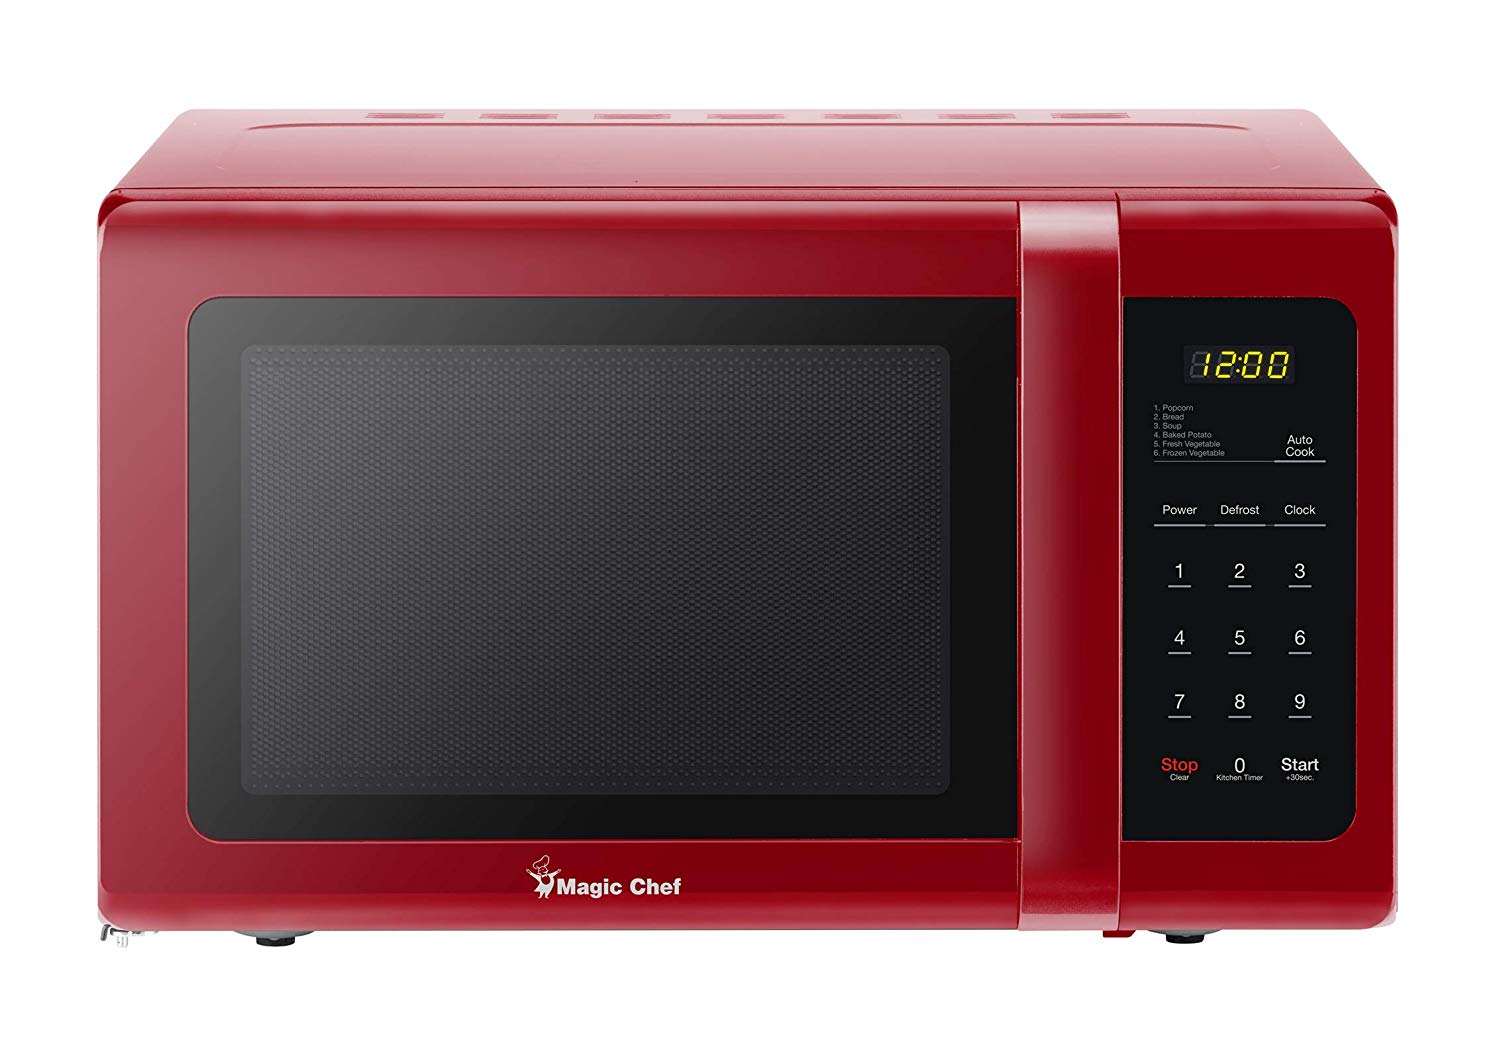 Magic Chef MCD993R 0.9 Cubic Feet Countertop Microwave (Red)